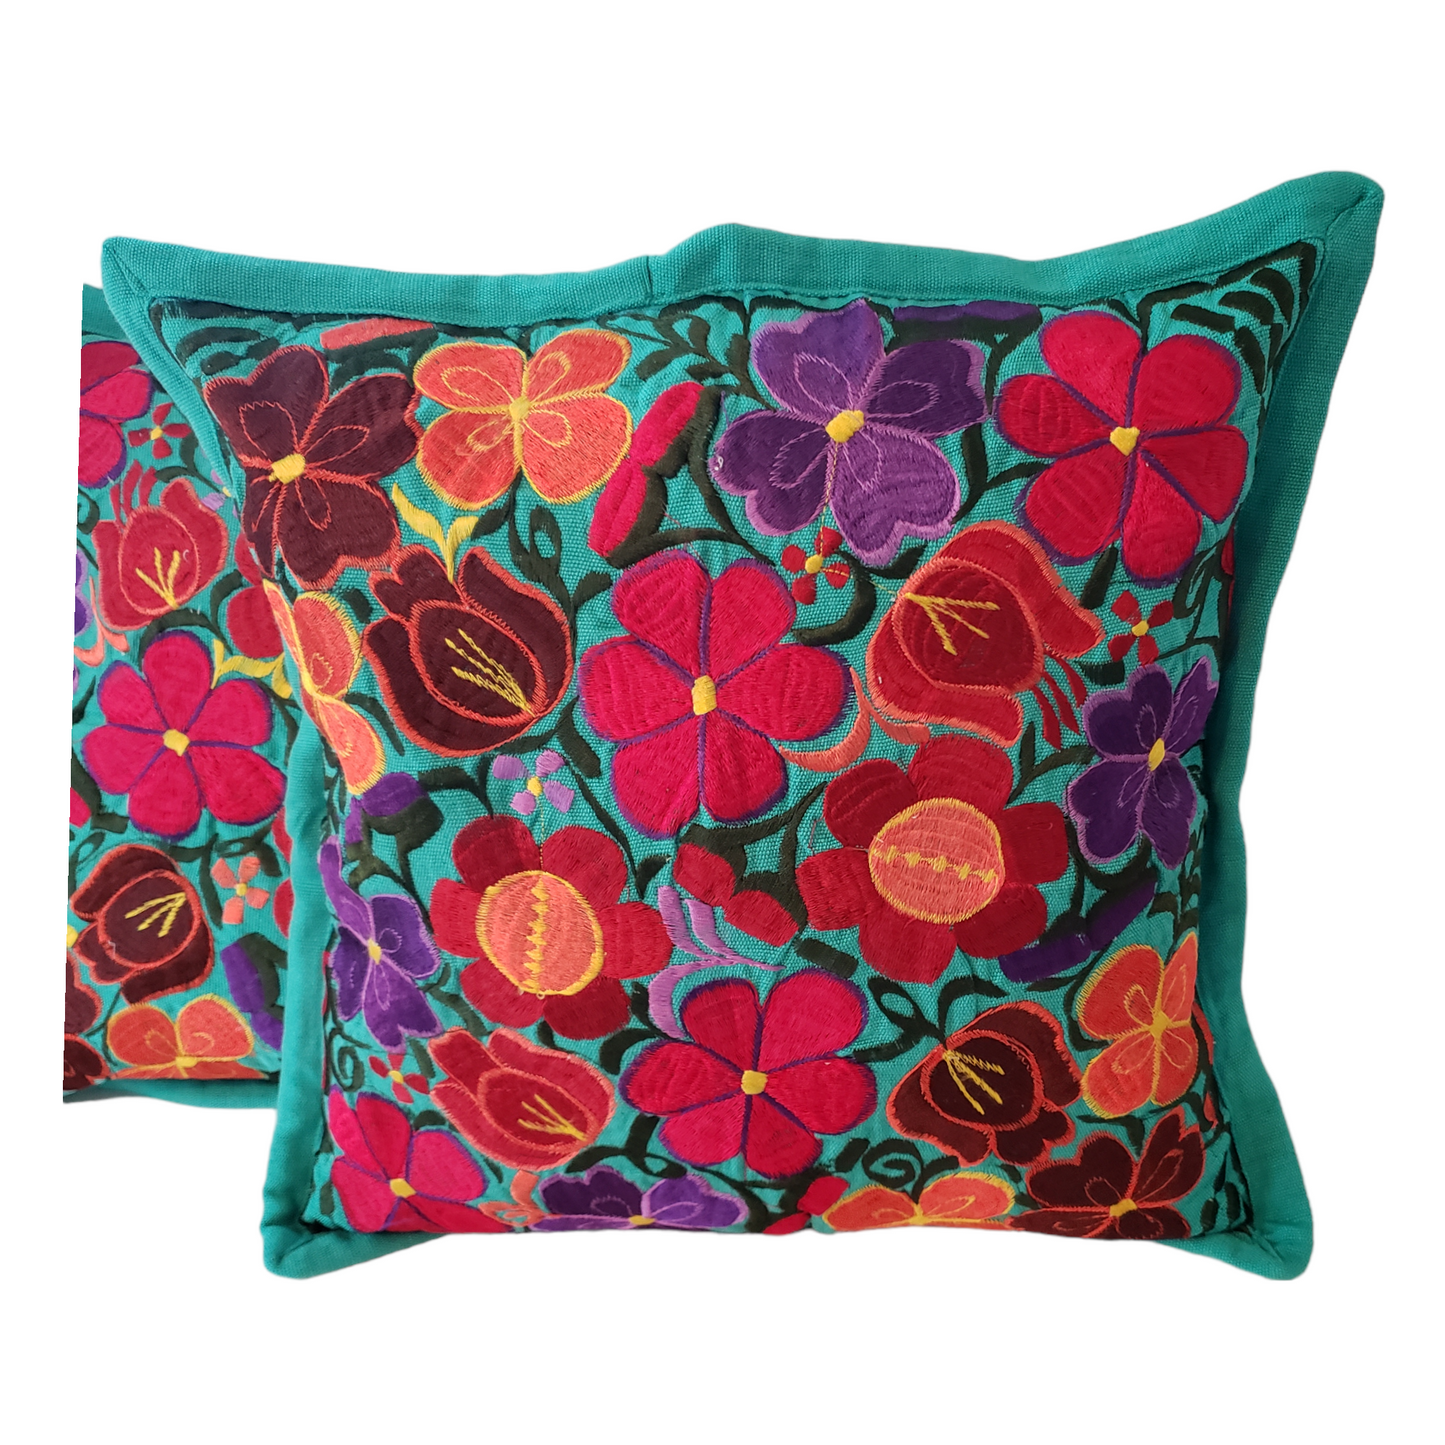 Set of 2 Mexican Pillow Covers Oaxaca Handmade Floral Embroidered Decorative Pillow Case 19"x19"